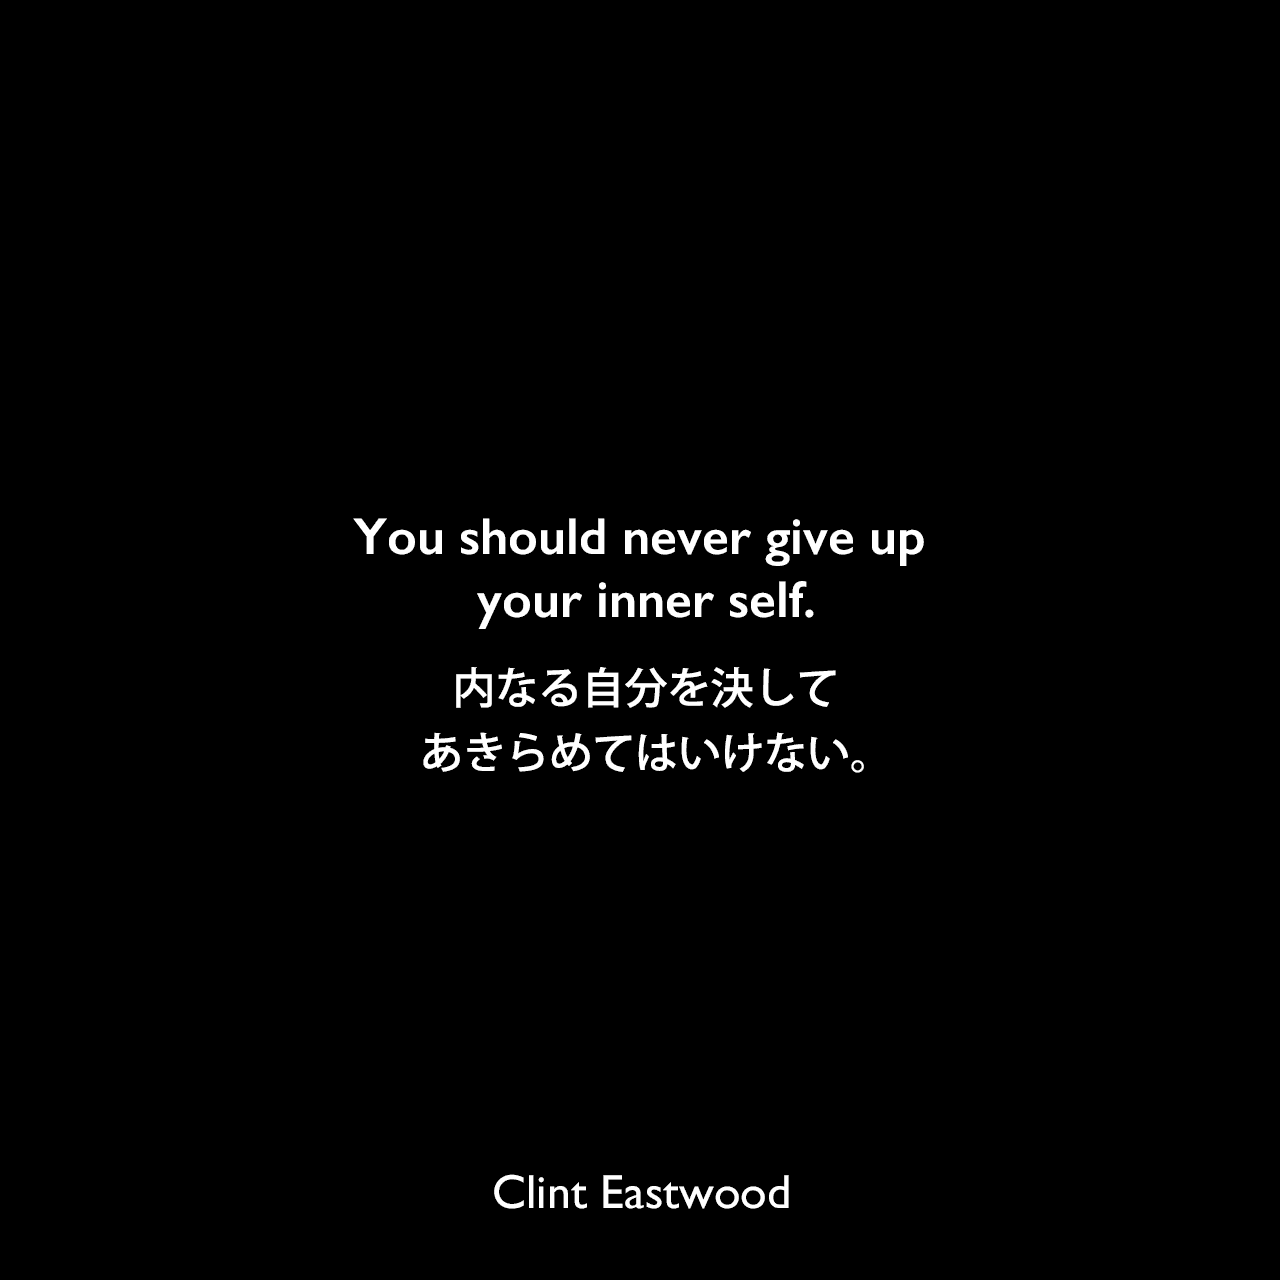 You should never give up your inner self.内なる自分を決してあきらめてはいけない。Clint Eastwood